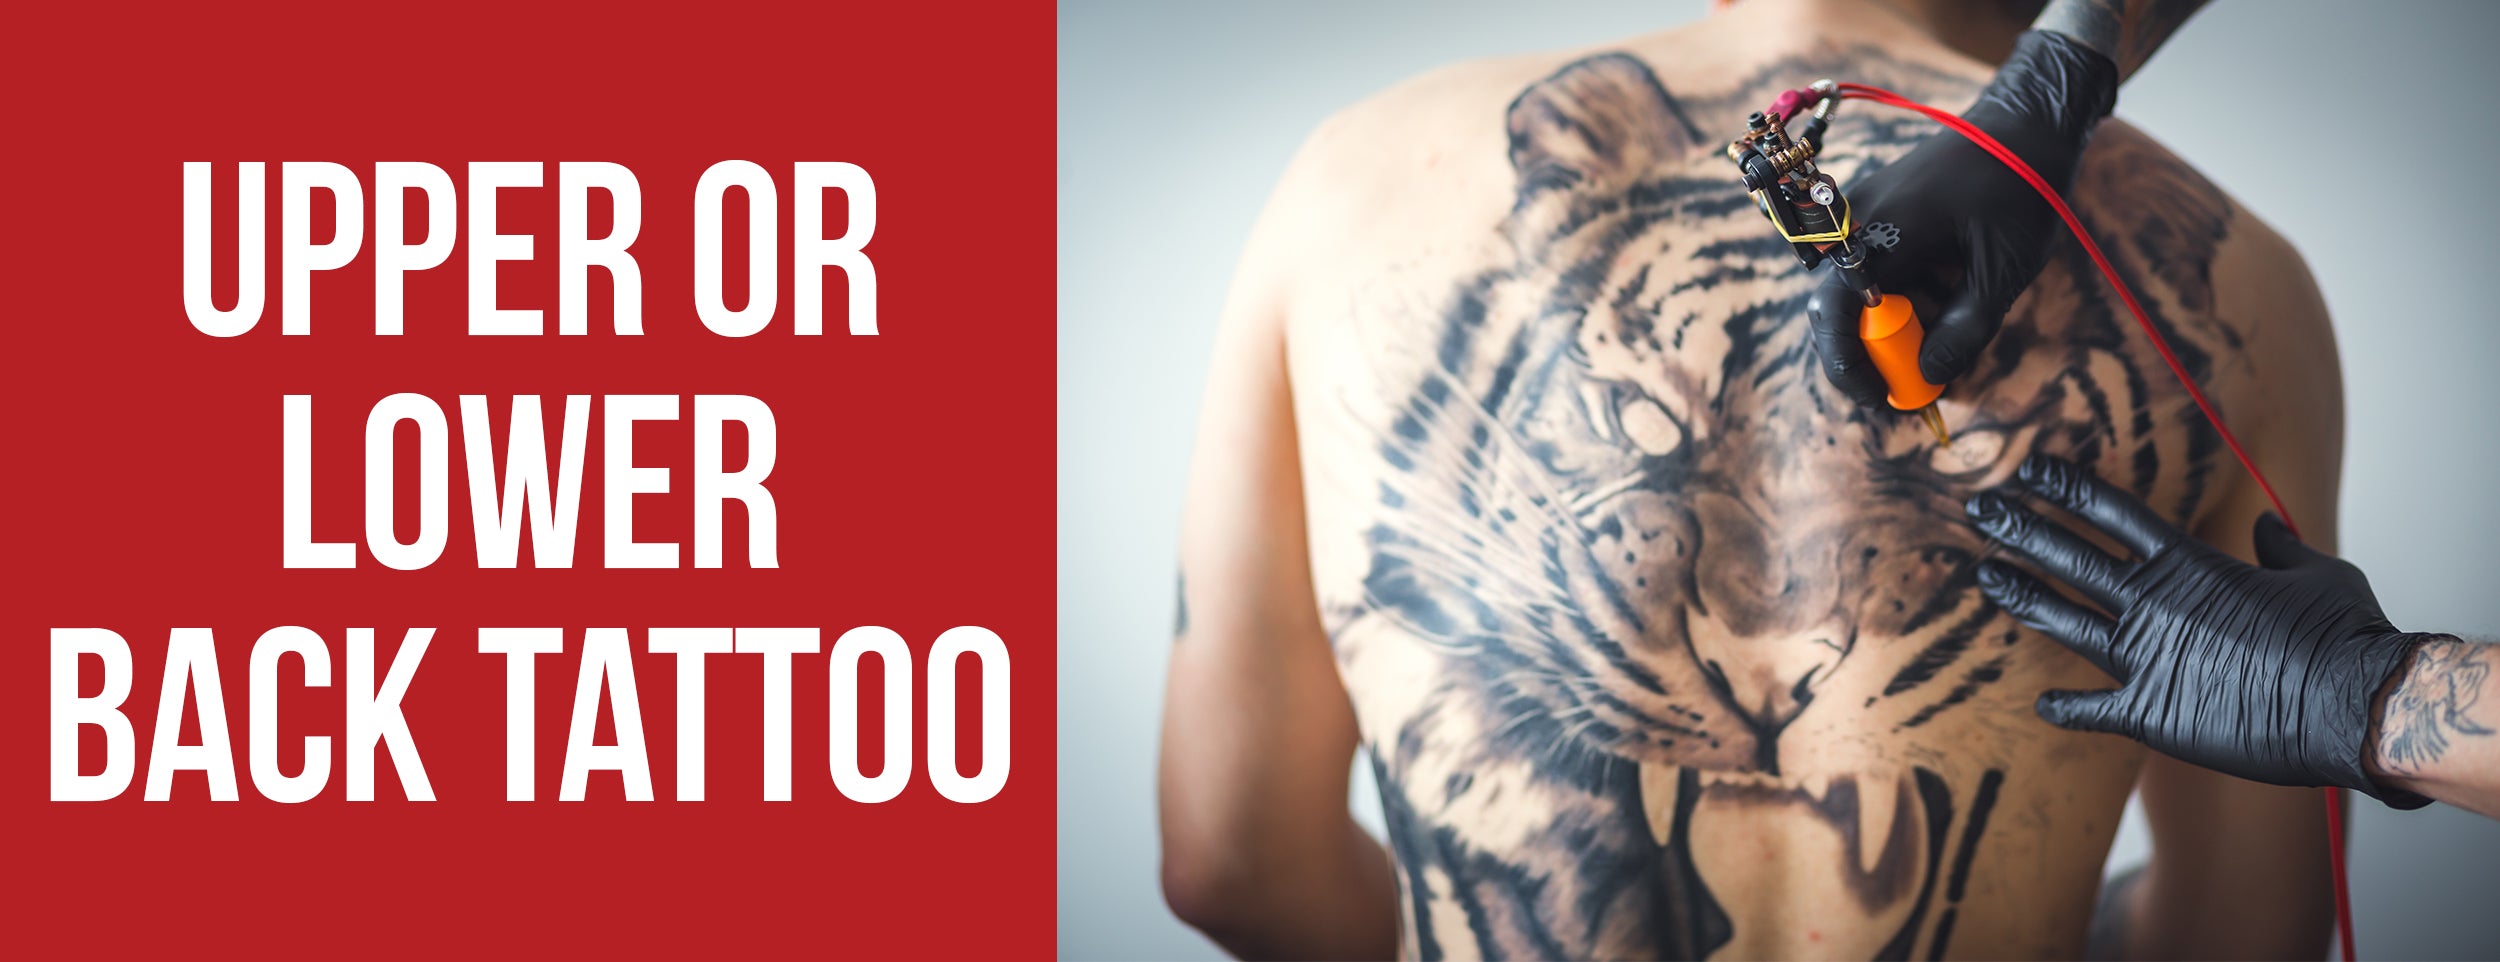 Upper or Lower Back Tattoos are the Easiest